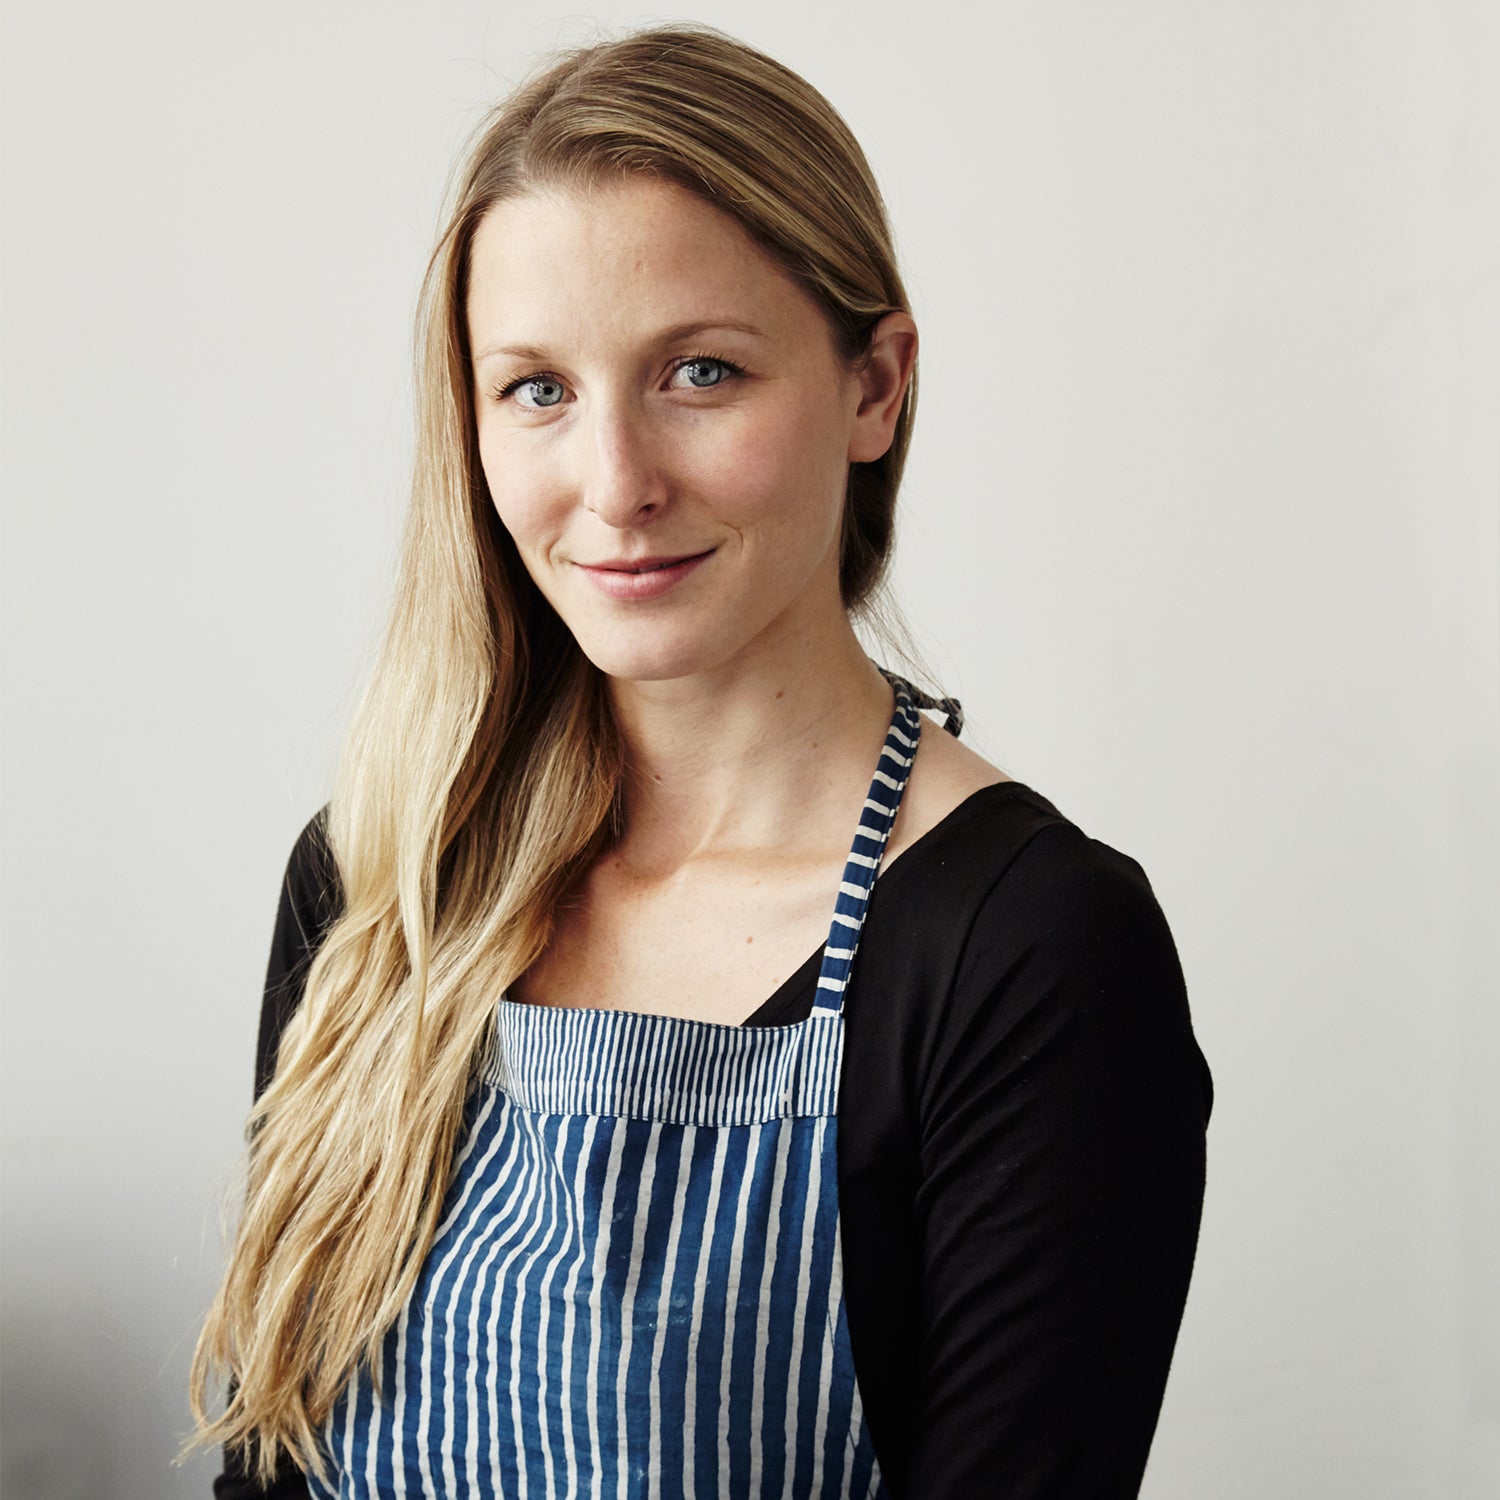 Close-up of a woman with long blonde hair smiling at the camera wearing a black top and a striped navy and white apron.